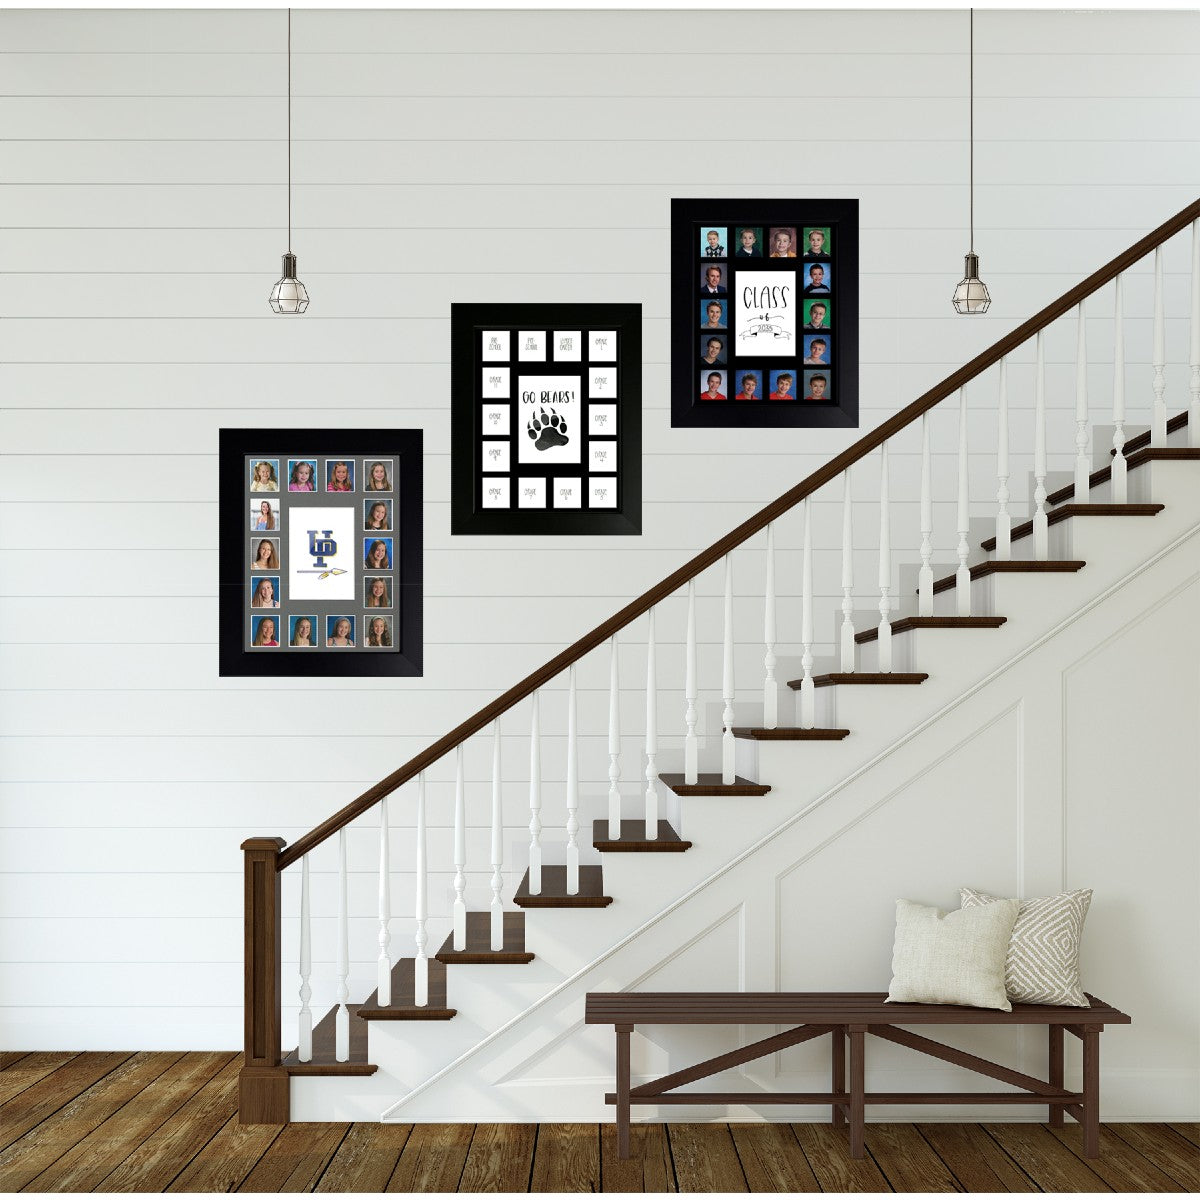 school picture frames displayed